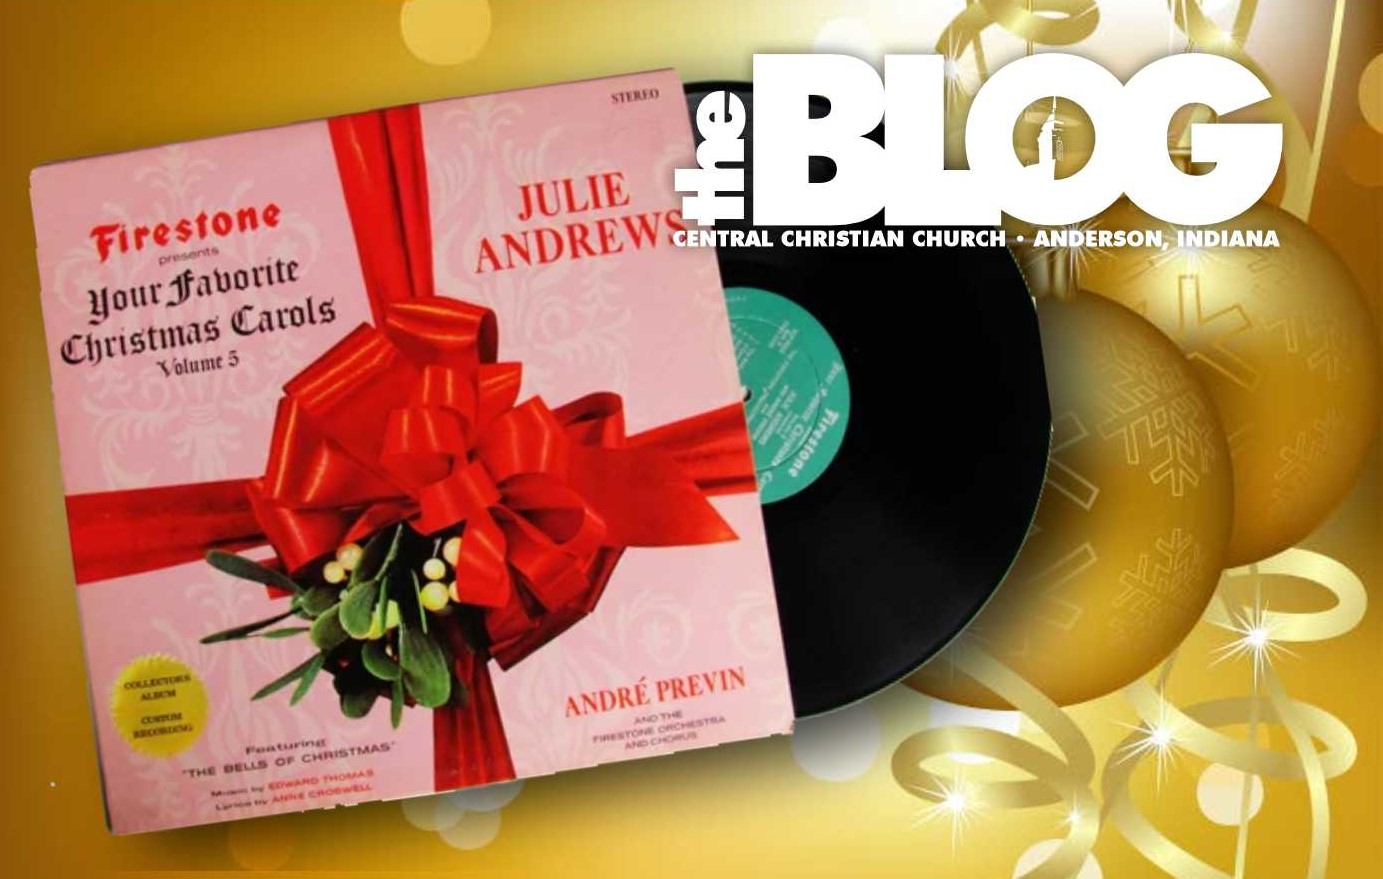 TEXACO, JULIE ANDREWS, and CHRISTMAS